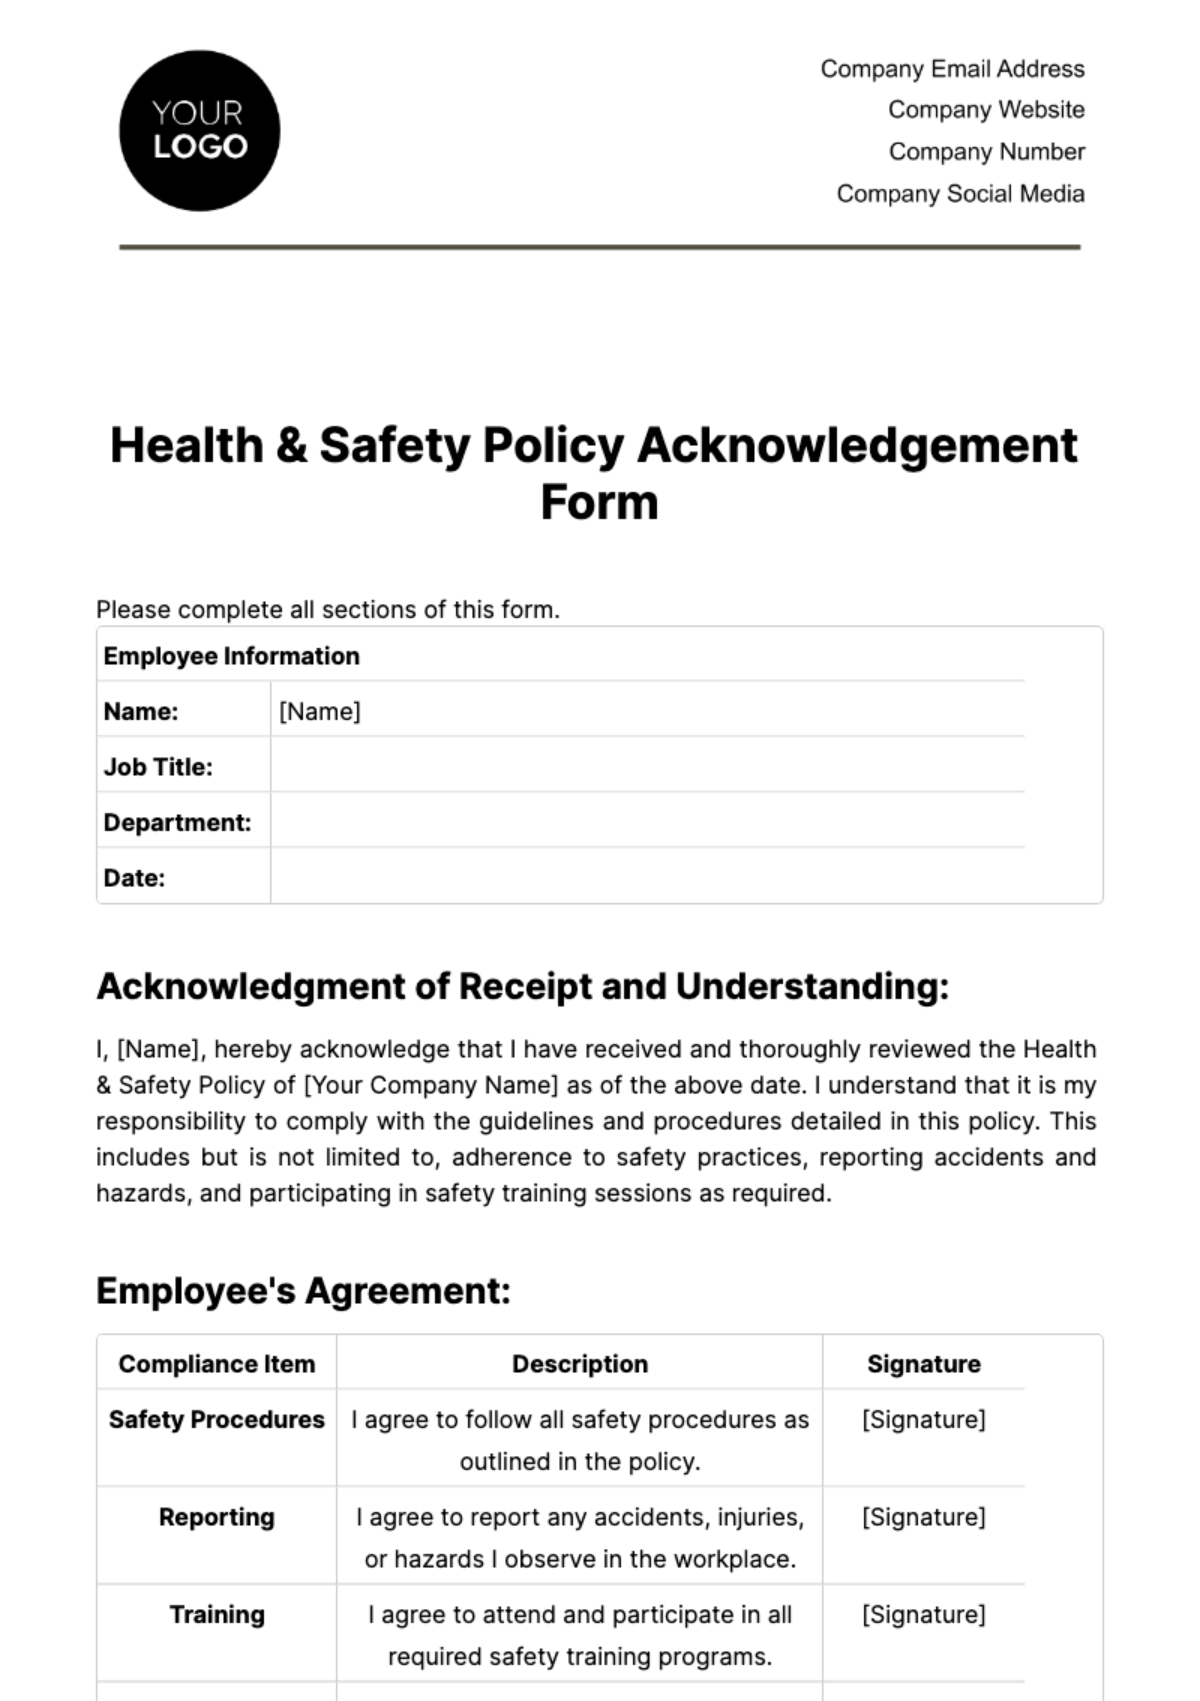 Health & Safety Policy Acknowledgement Form Template